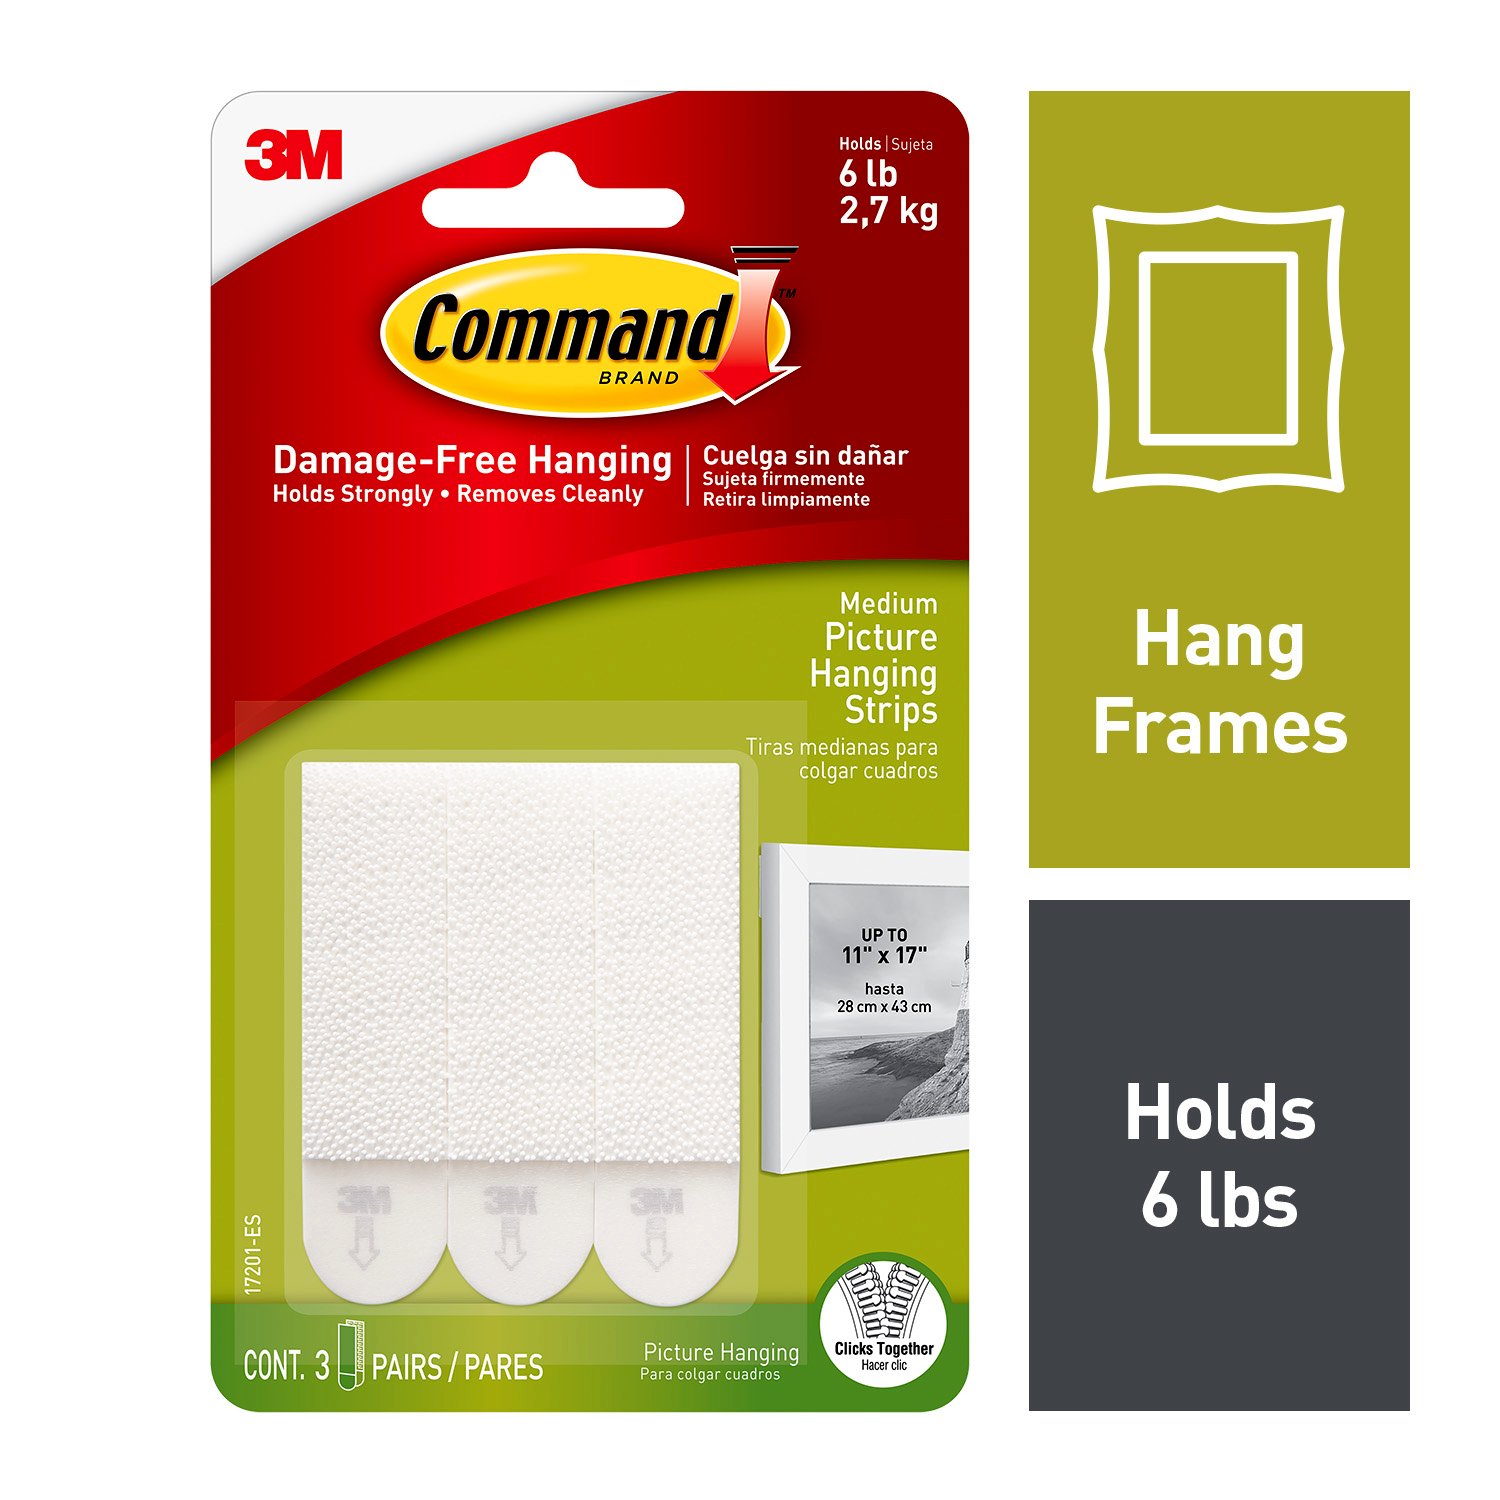 7000042818 - Command Picture Hanging Strips 17201, Medium Picture Hanging Strip, 9 Pack/Bag, 3 Bag/Case